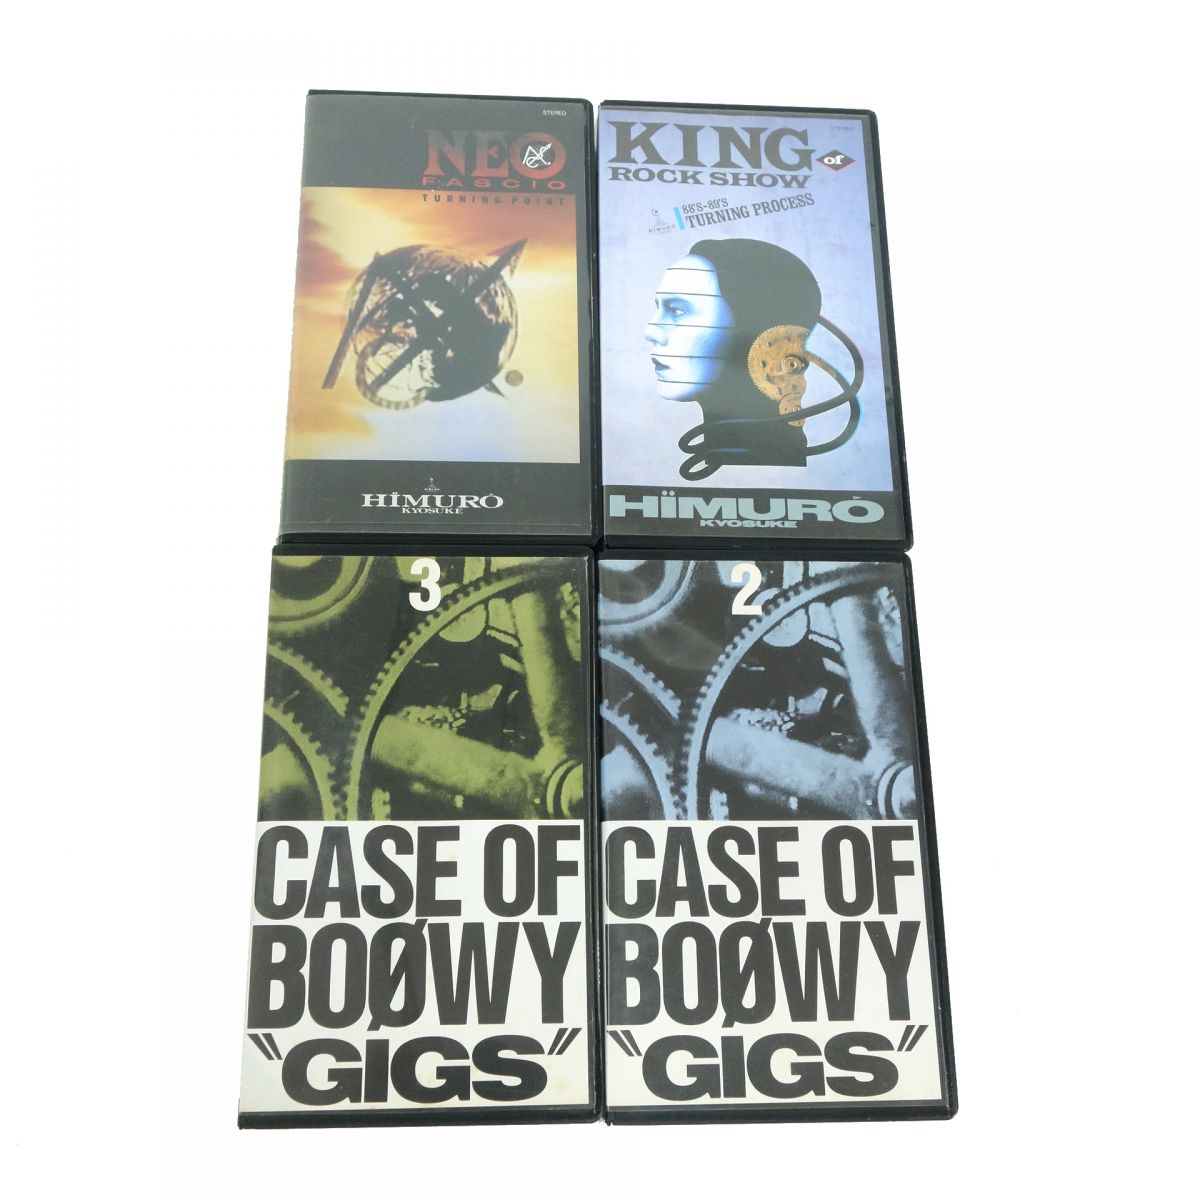 VHS ビデオテープ BOOWY GIGS CASE OF BOOWY 2・3＆氷室京介 KING OF ROCK SHOW・NEO FASCIO TURNING POINT 4本 セット ※ジャンク